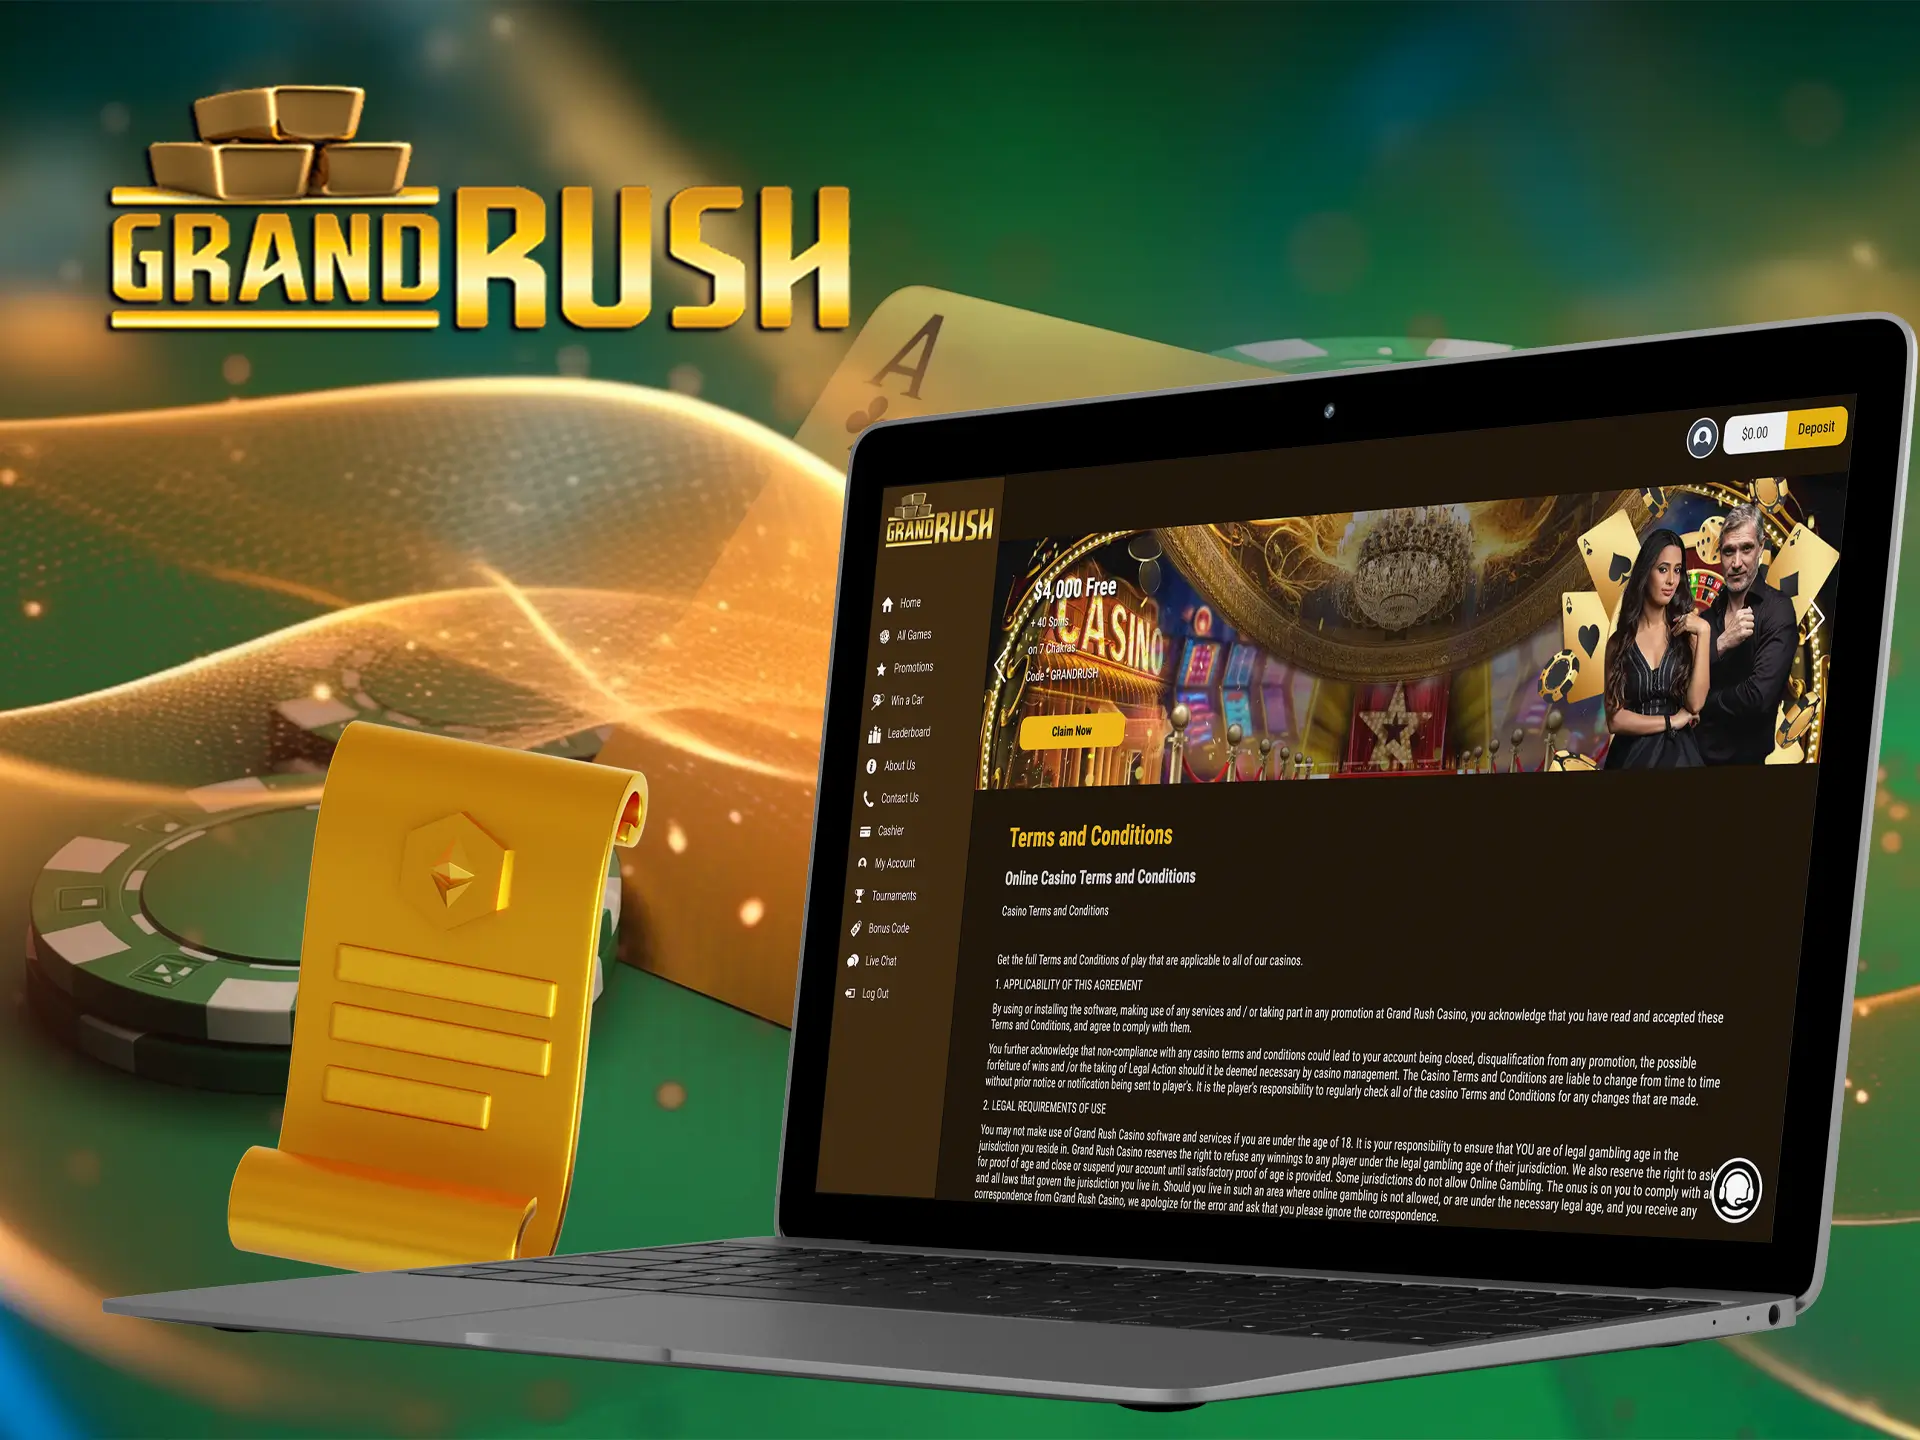 Players should read the Grand Rush Casino main rules before starting to play.